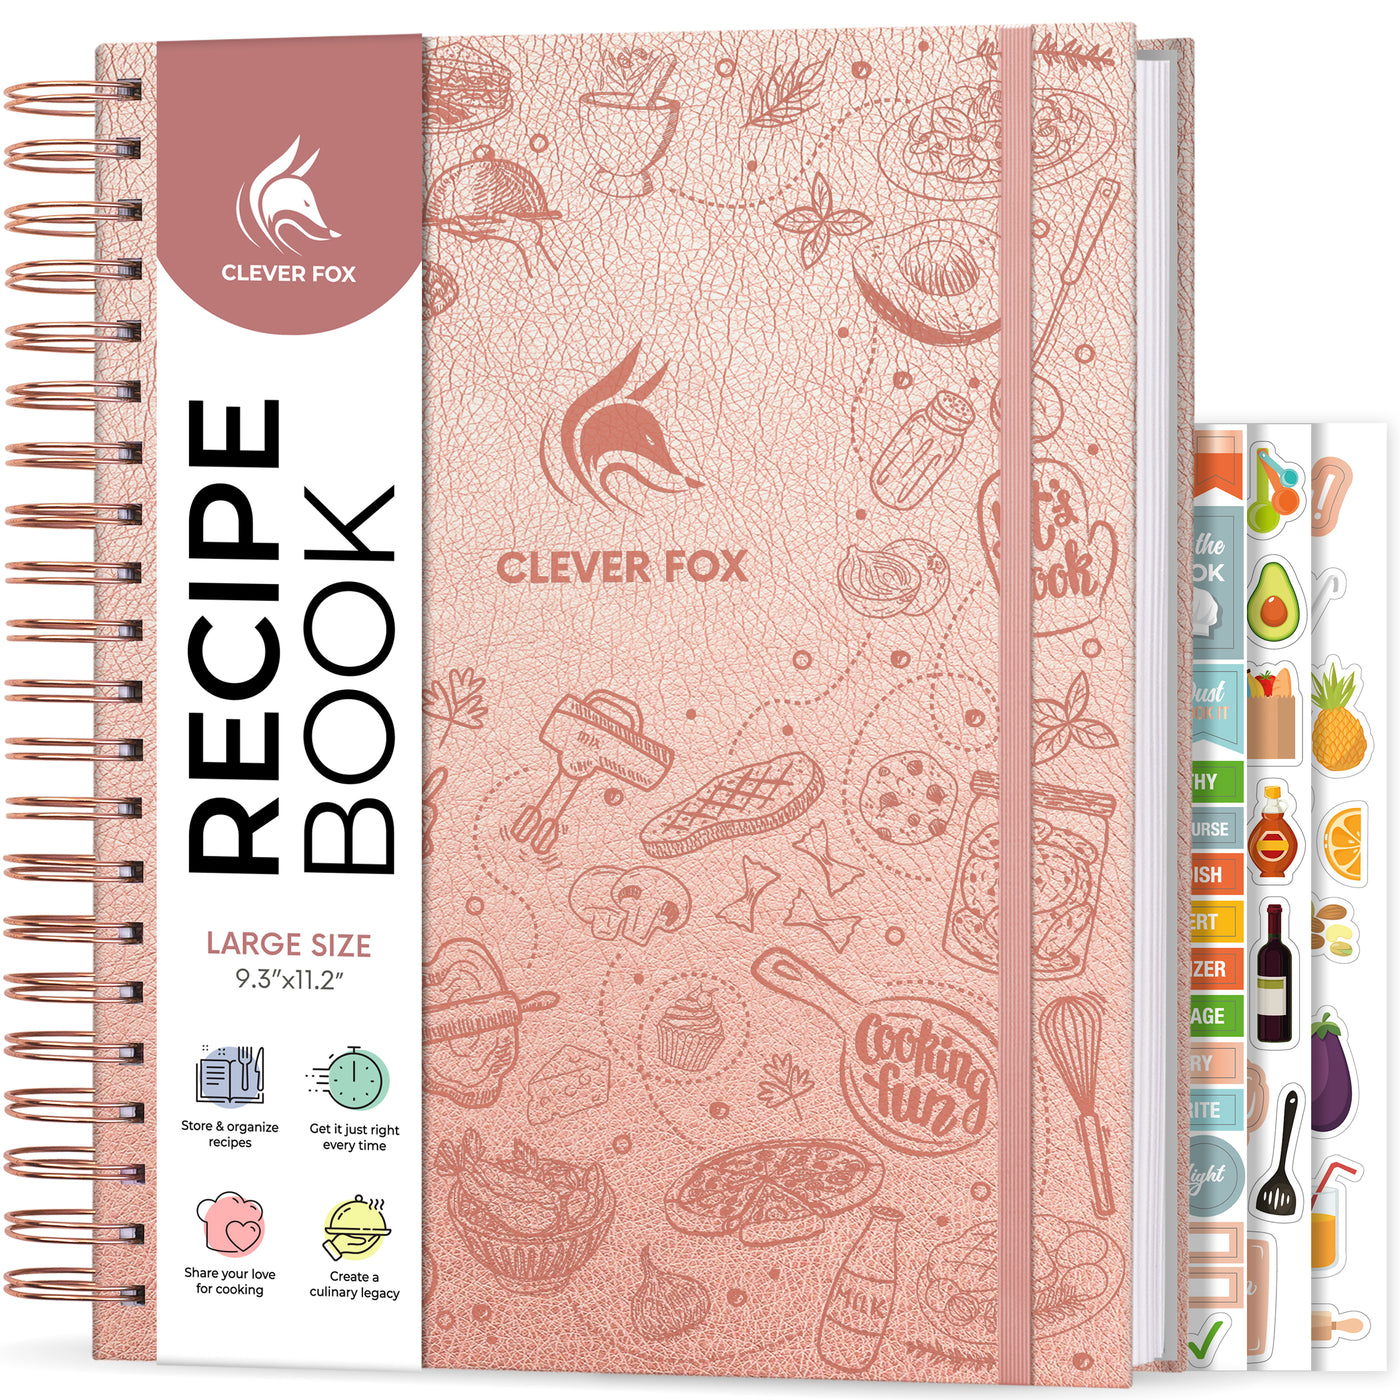 Clever Fox Recipe Book, Size: One size, Pink